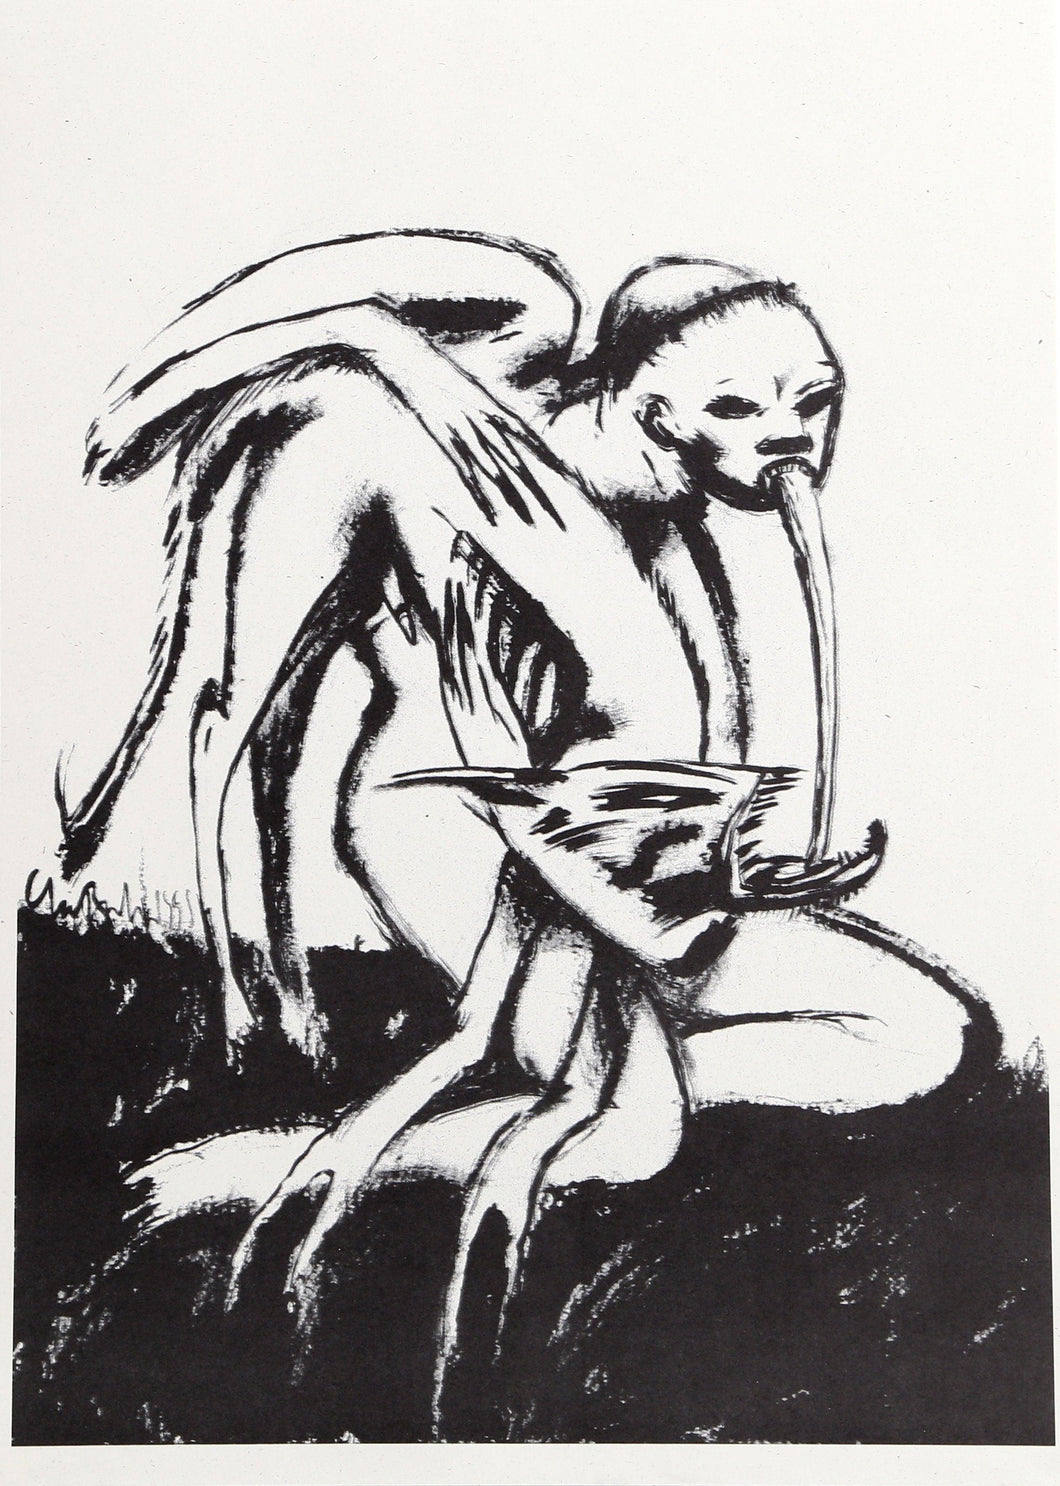 Feeding the Familiar from The Illusions Suite Lithograph | Clive Barker,{{product.type}}